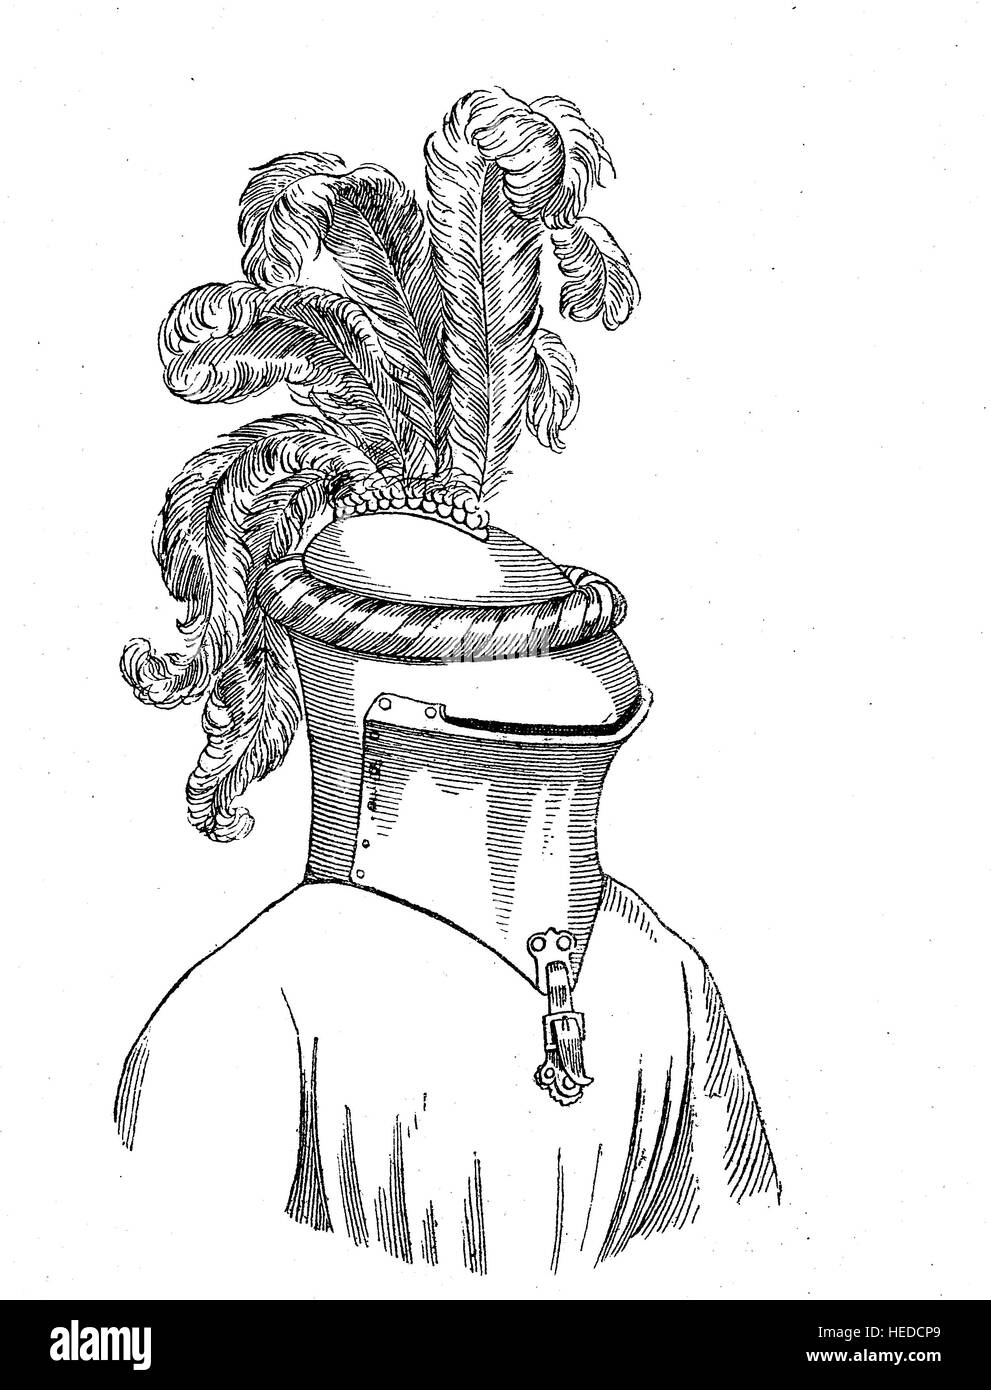 The frog-mouth helm or Stechhelm, meaning jousting helmet in German, was a type of great helm from the 15th century, from a woodcut of 1880, digital improved Stock Photo